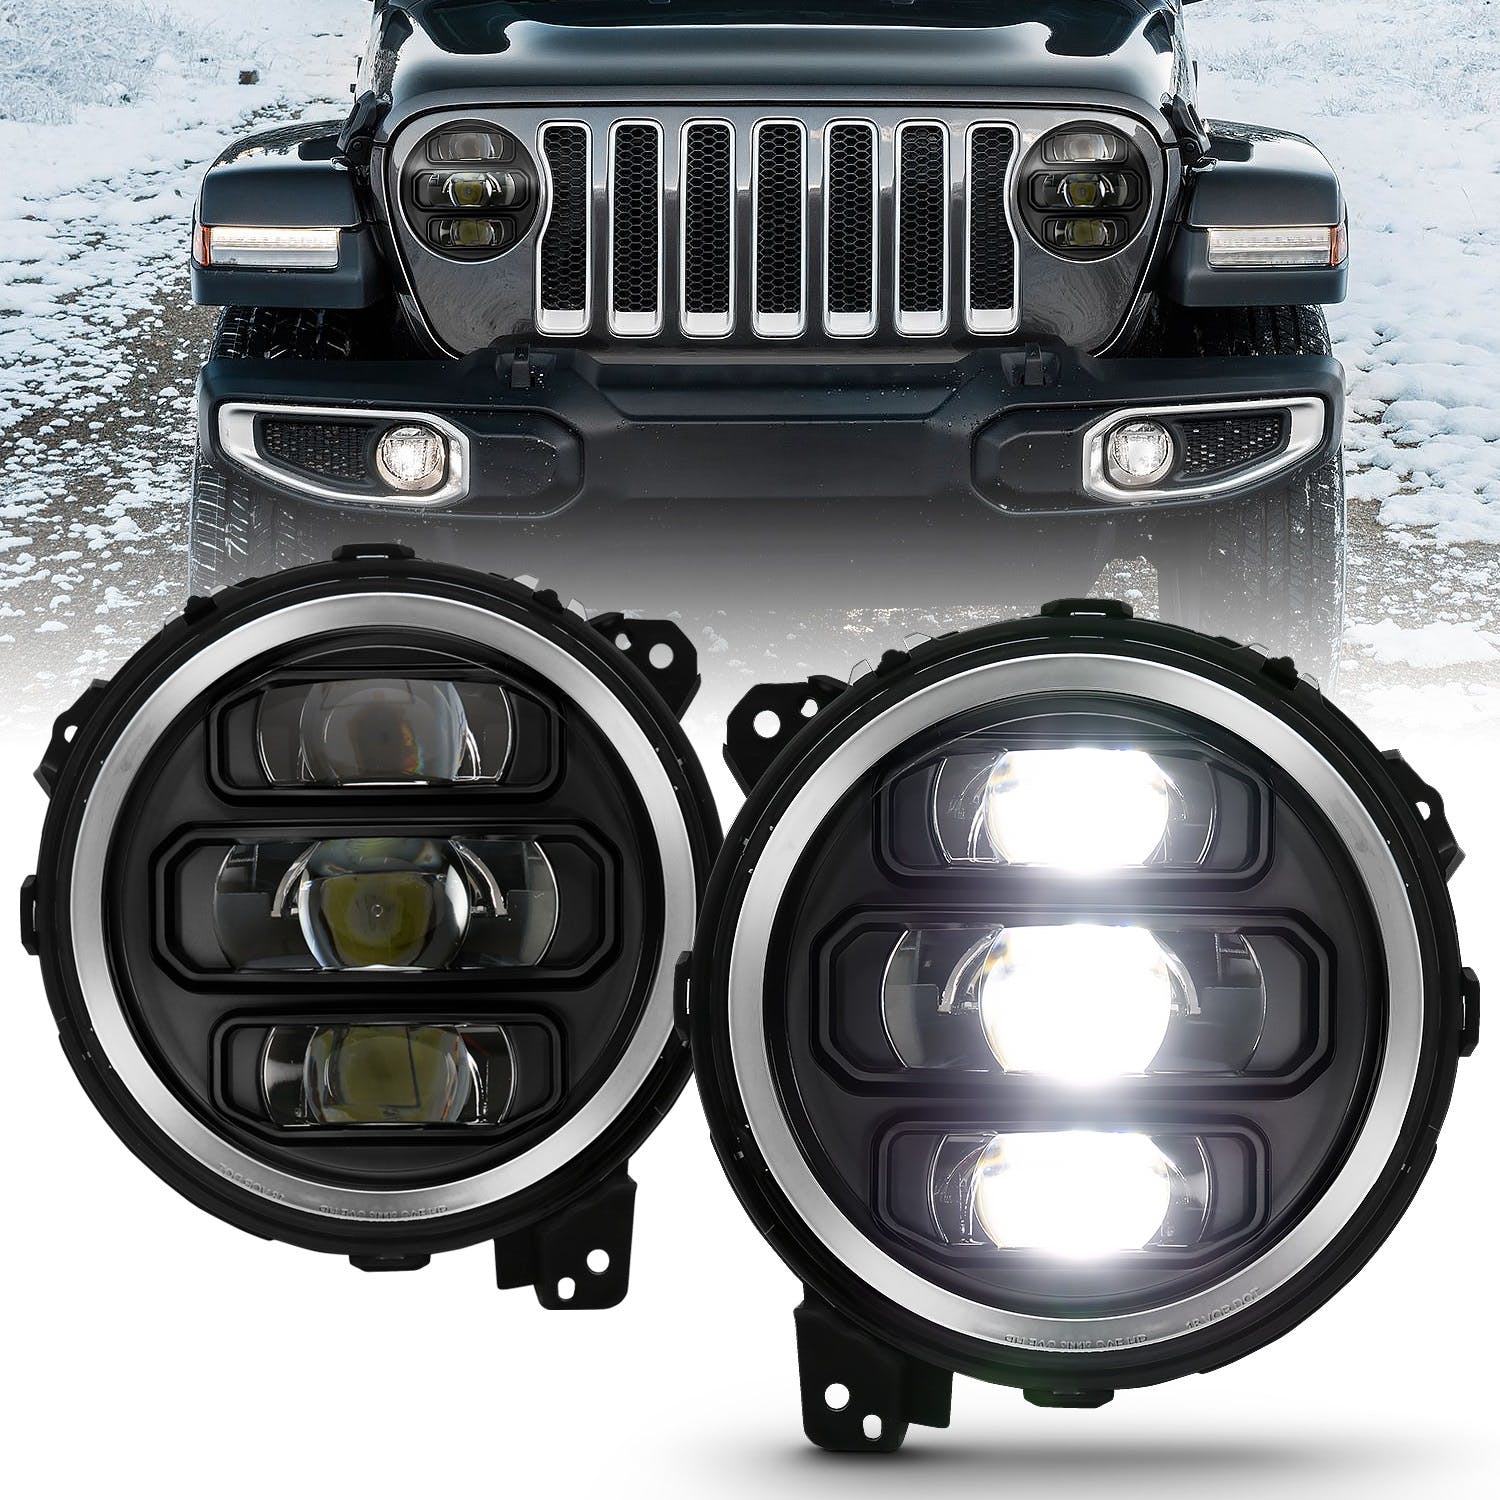 AnzoUSA 111466 Full Led Projector Headlights Black